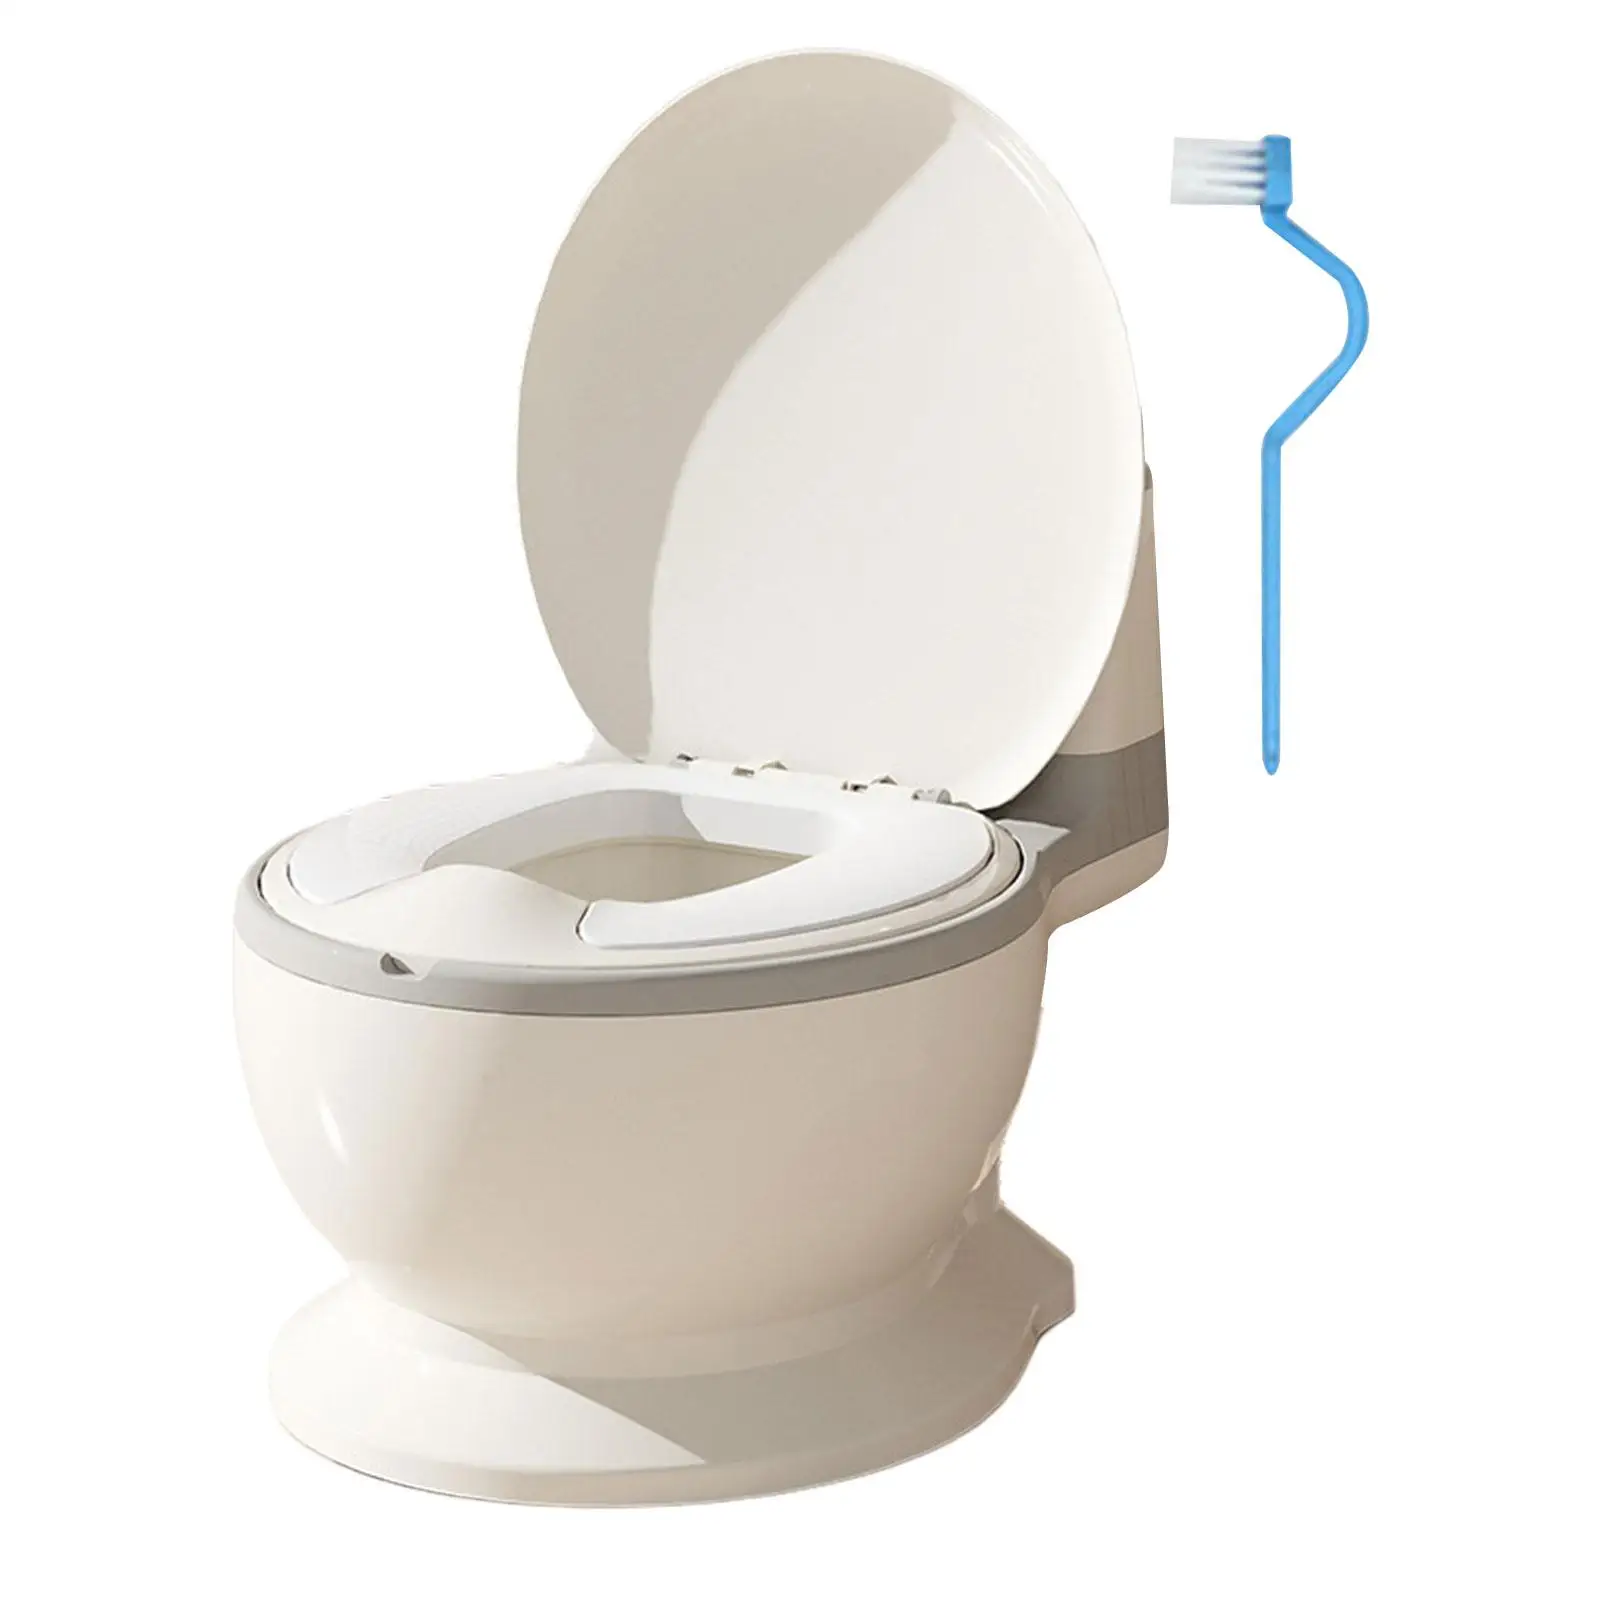 Toilet Training Potty Non Slip Lifelike Flush Button Includes Cleaning Brush Training Transition Potty Seat for Bedroom Ages 0-7